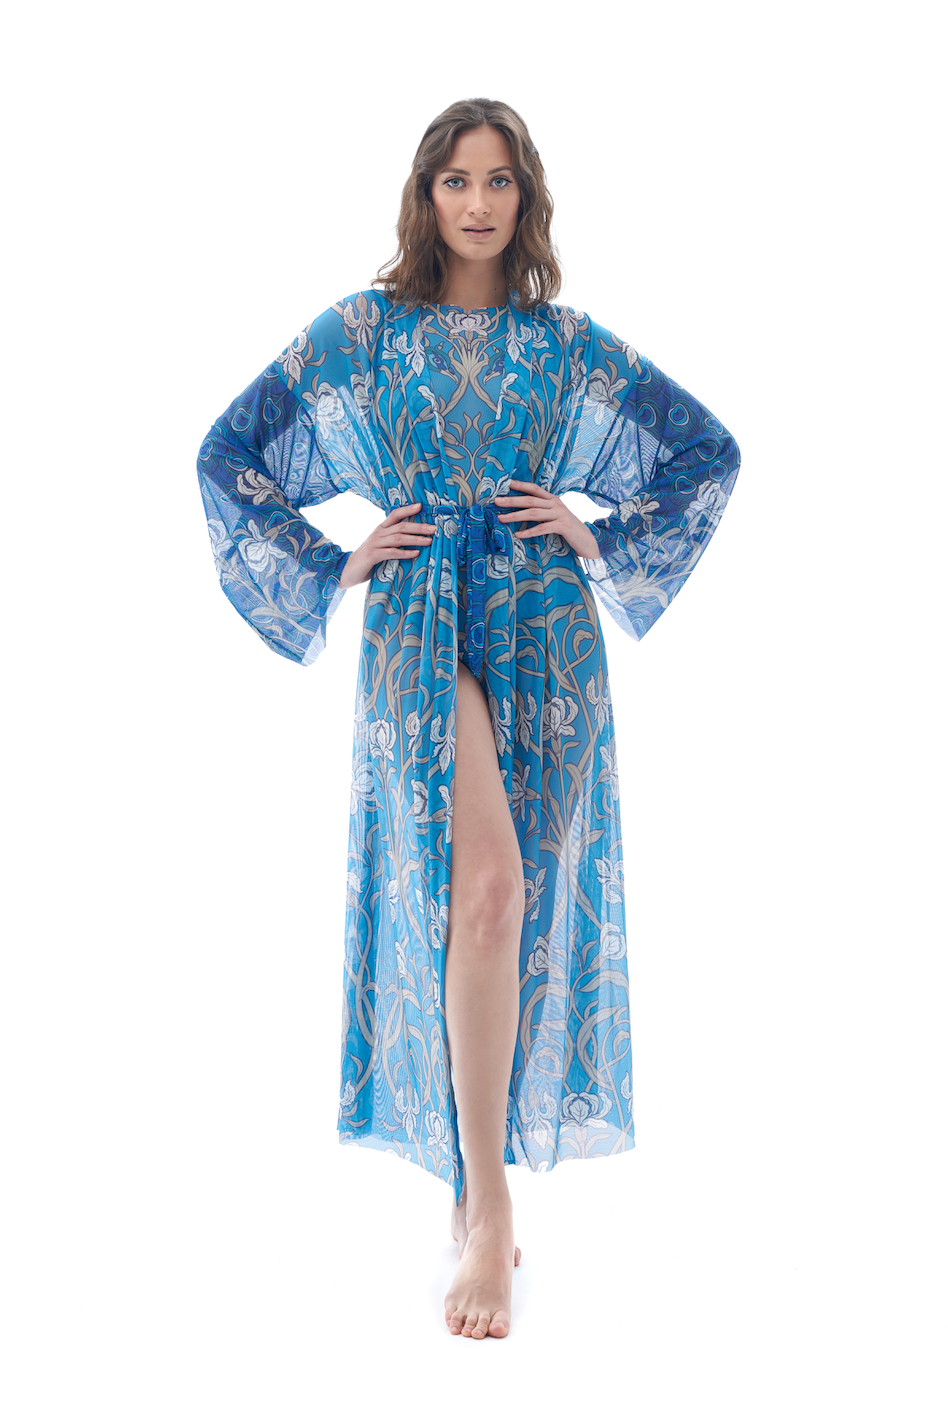 This file contains images and information about tan-through smart swimsuits. Featuring a vibrant peacock print, it offers options like beach robes for a luxurious beach experience.